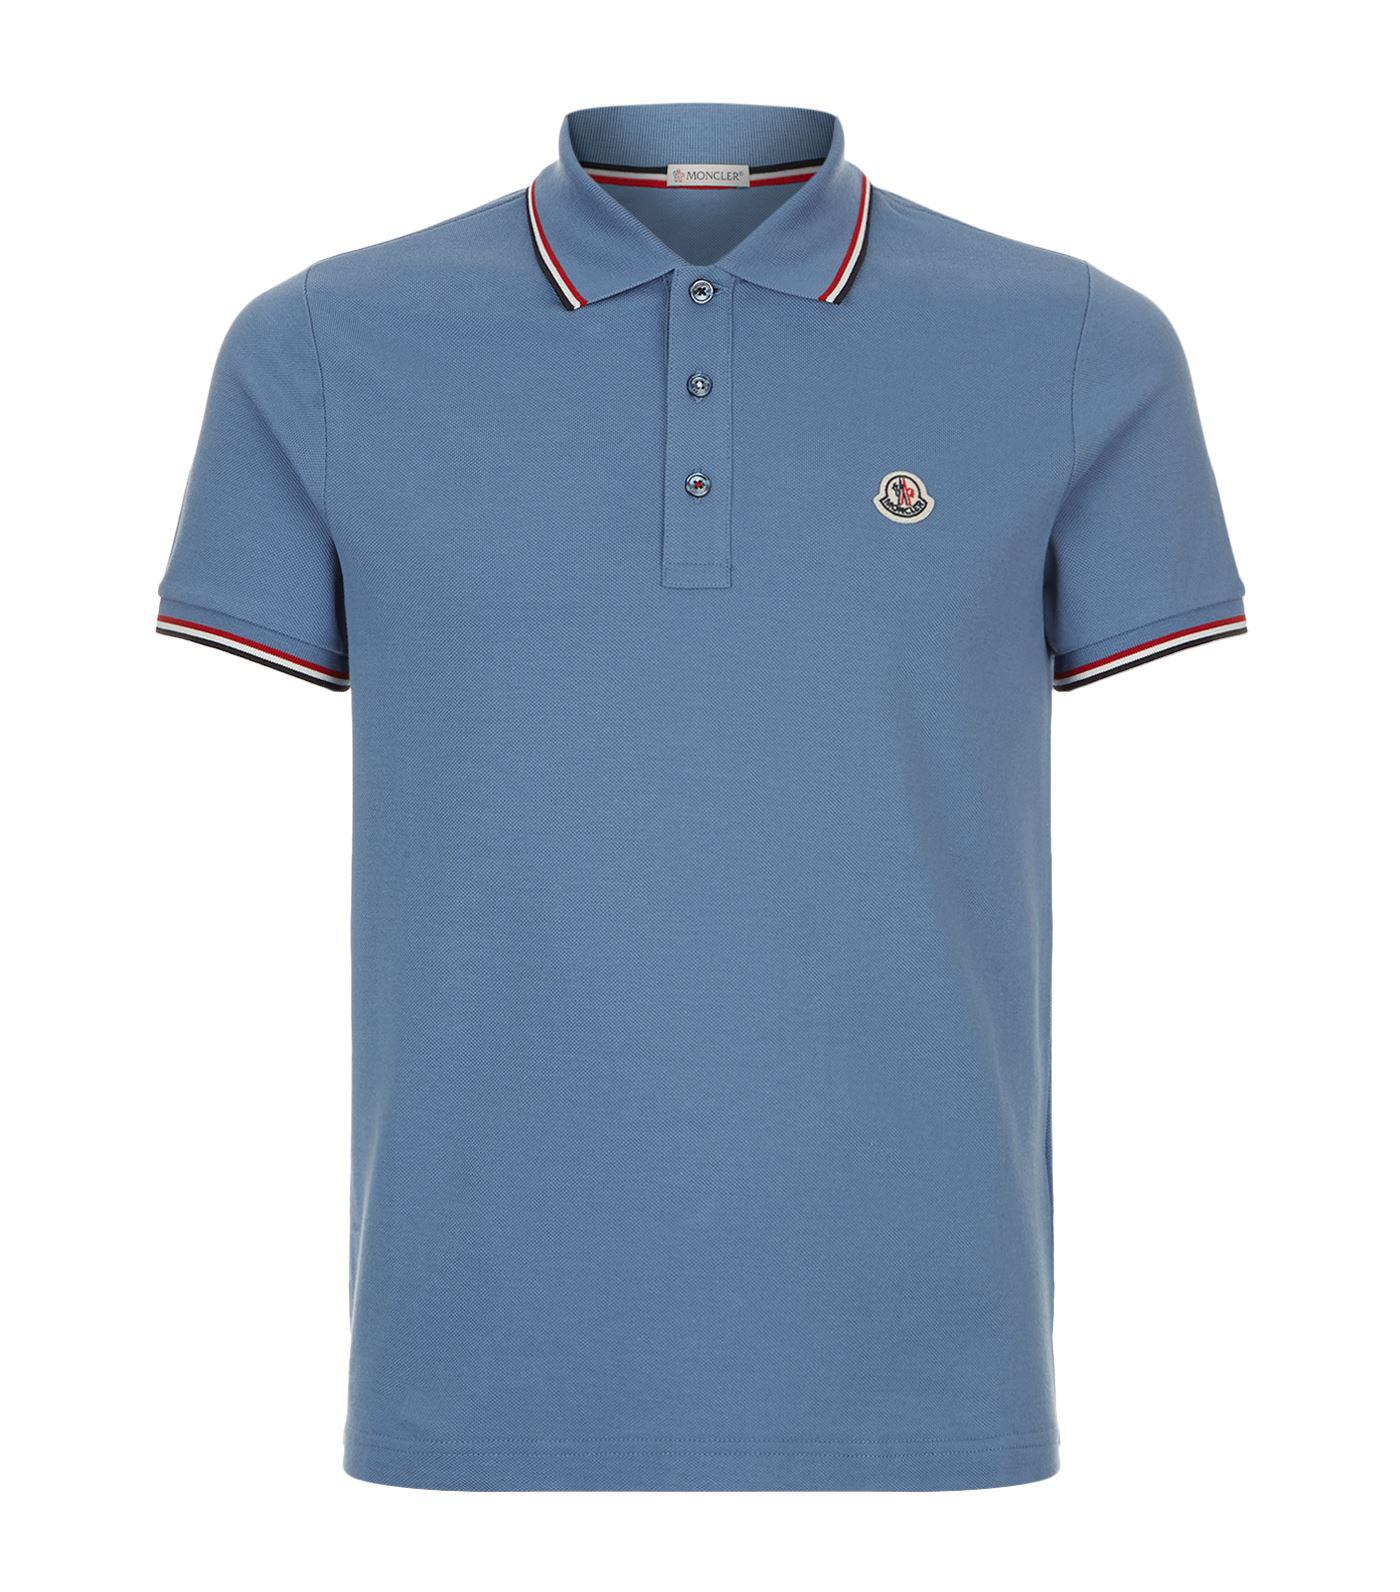 Moncler Cotton Short-sleeved Polo Shirt in Navy (Blue) for Men - Lyst